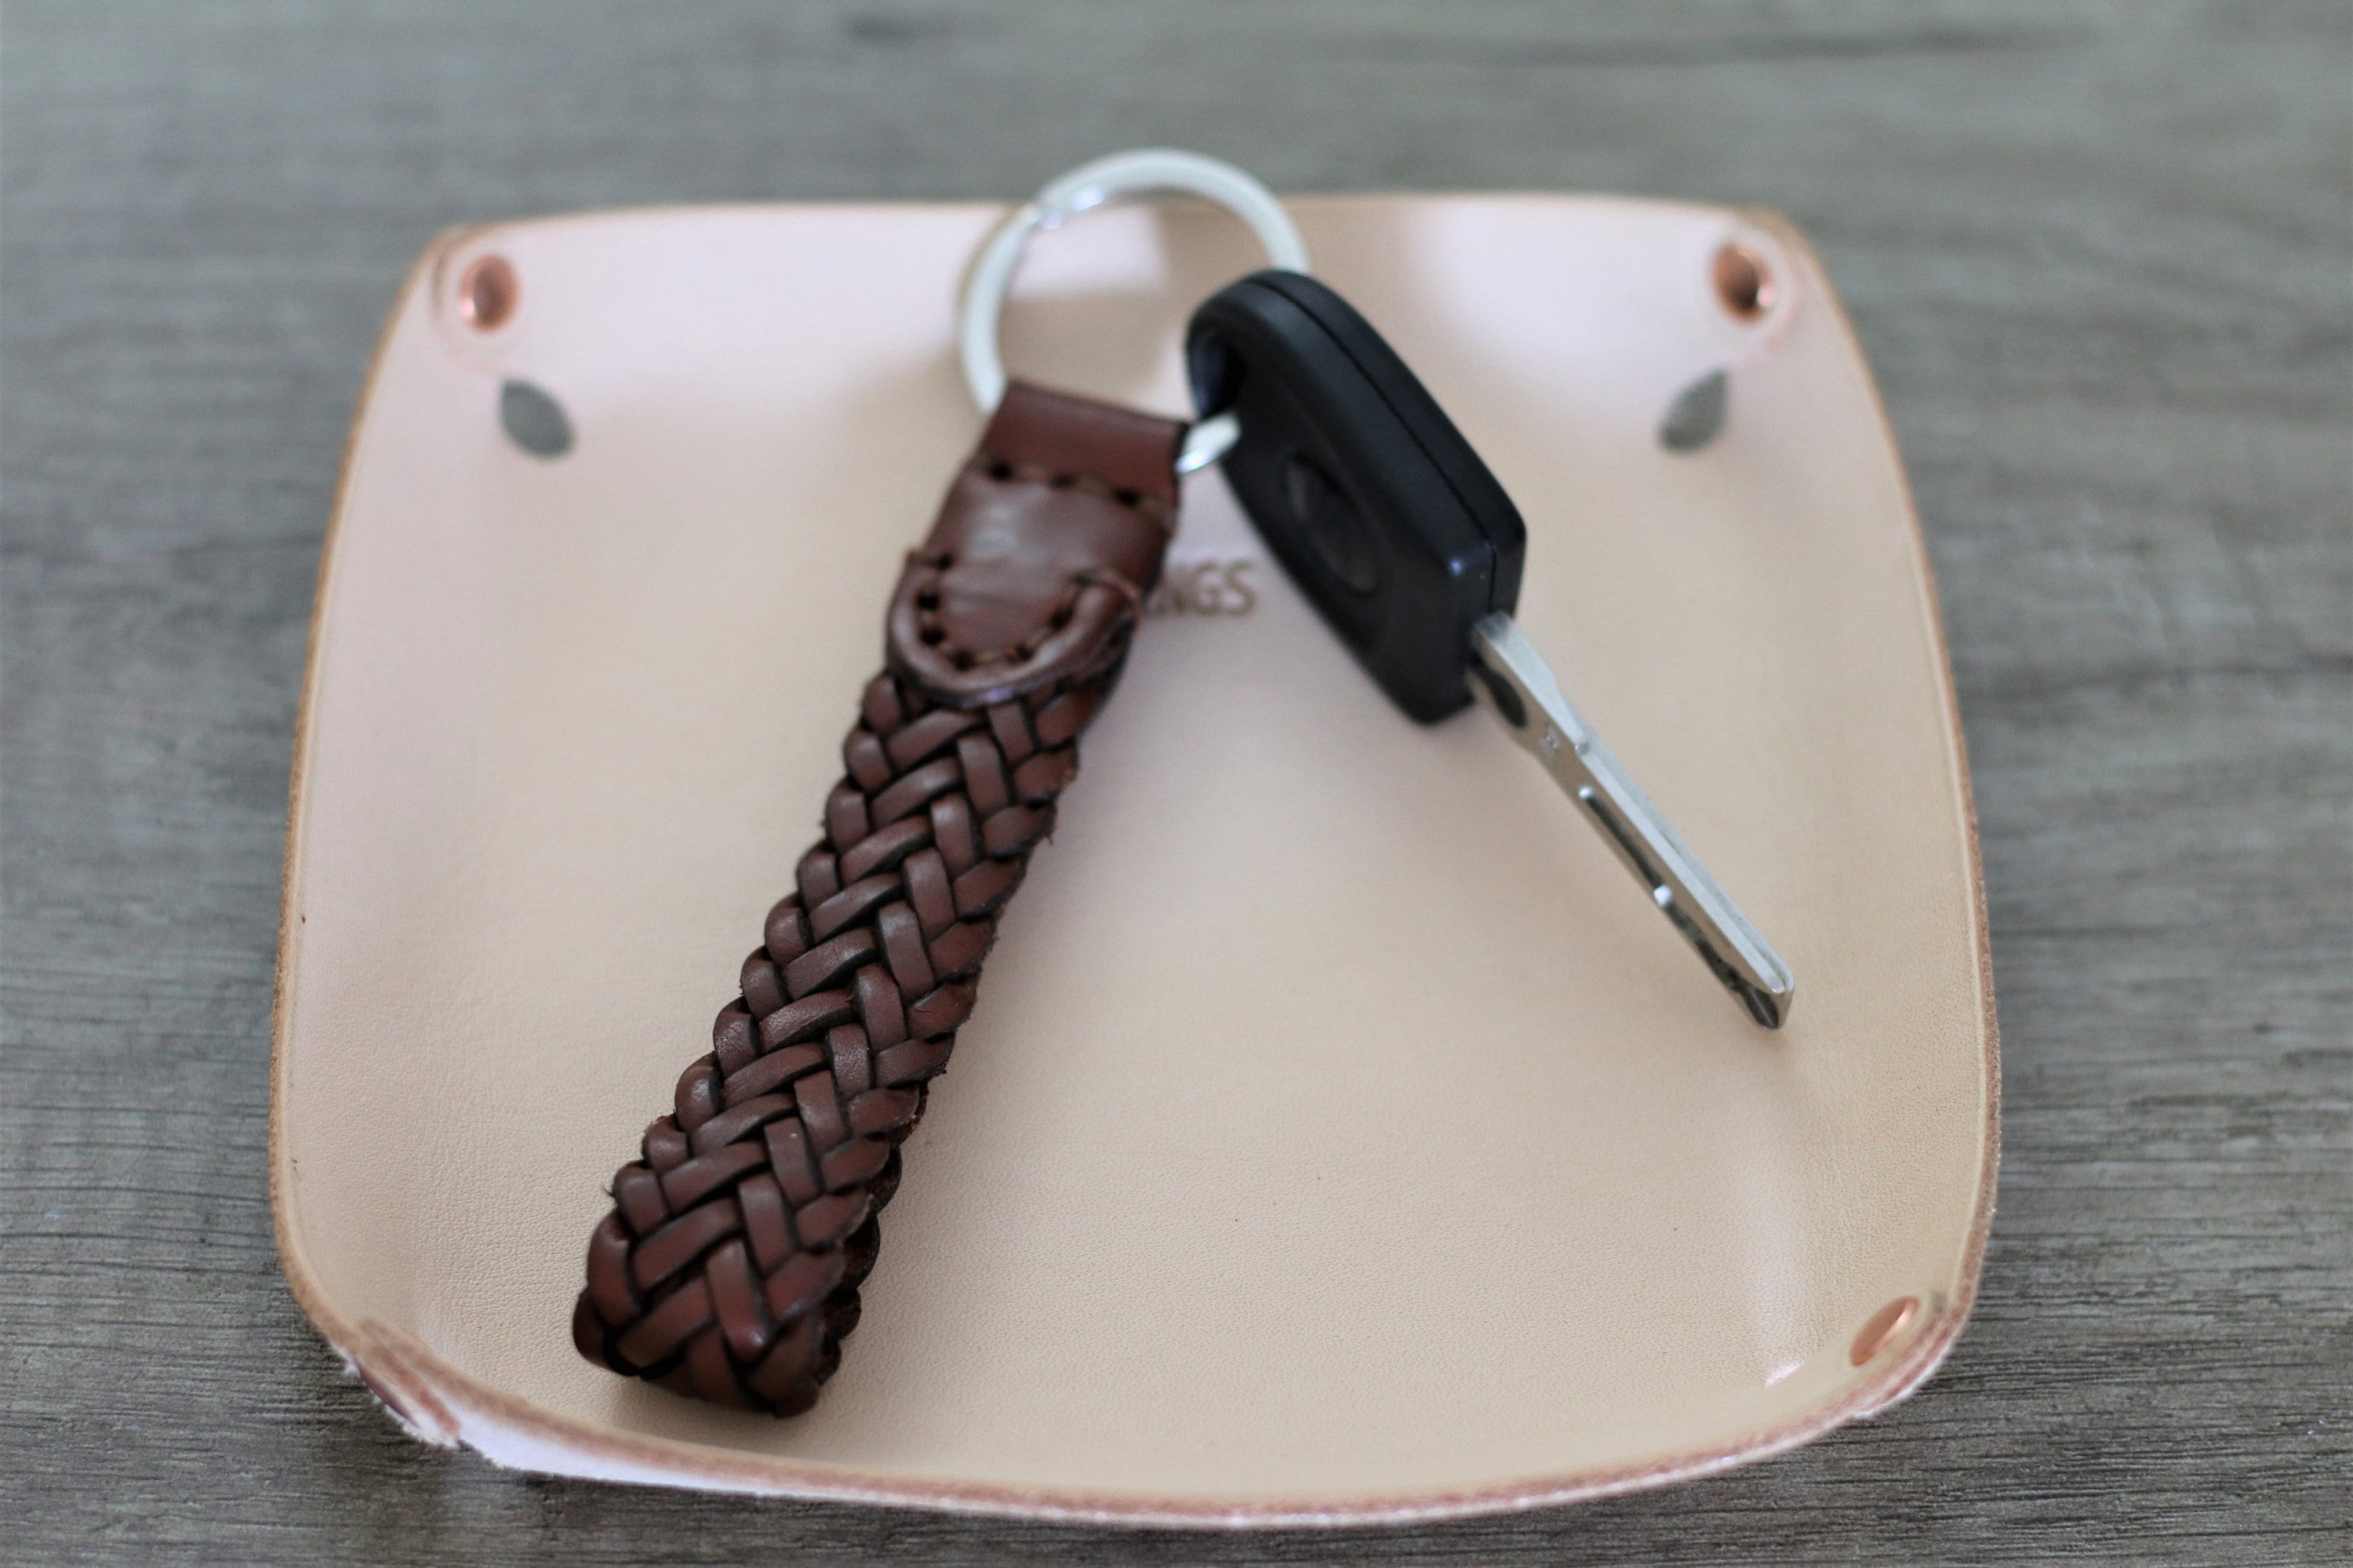 Leathings Braid Leather Keychain Handcrafted Leather Goods New Car Gift Key Fob Practical Luxury Housewarming Gift Hand Braided Keychain Gift for Men